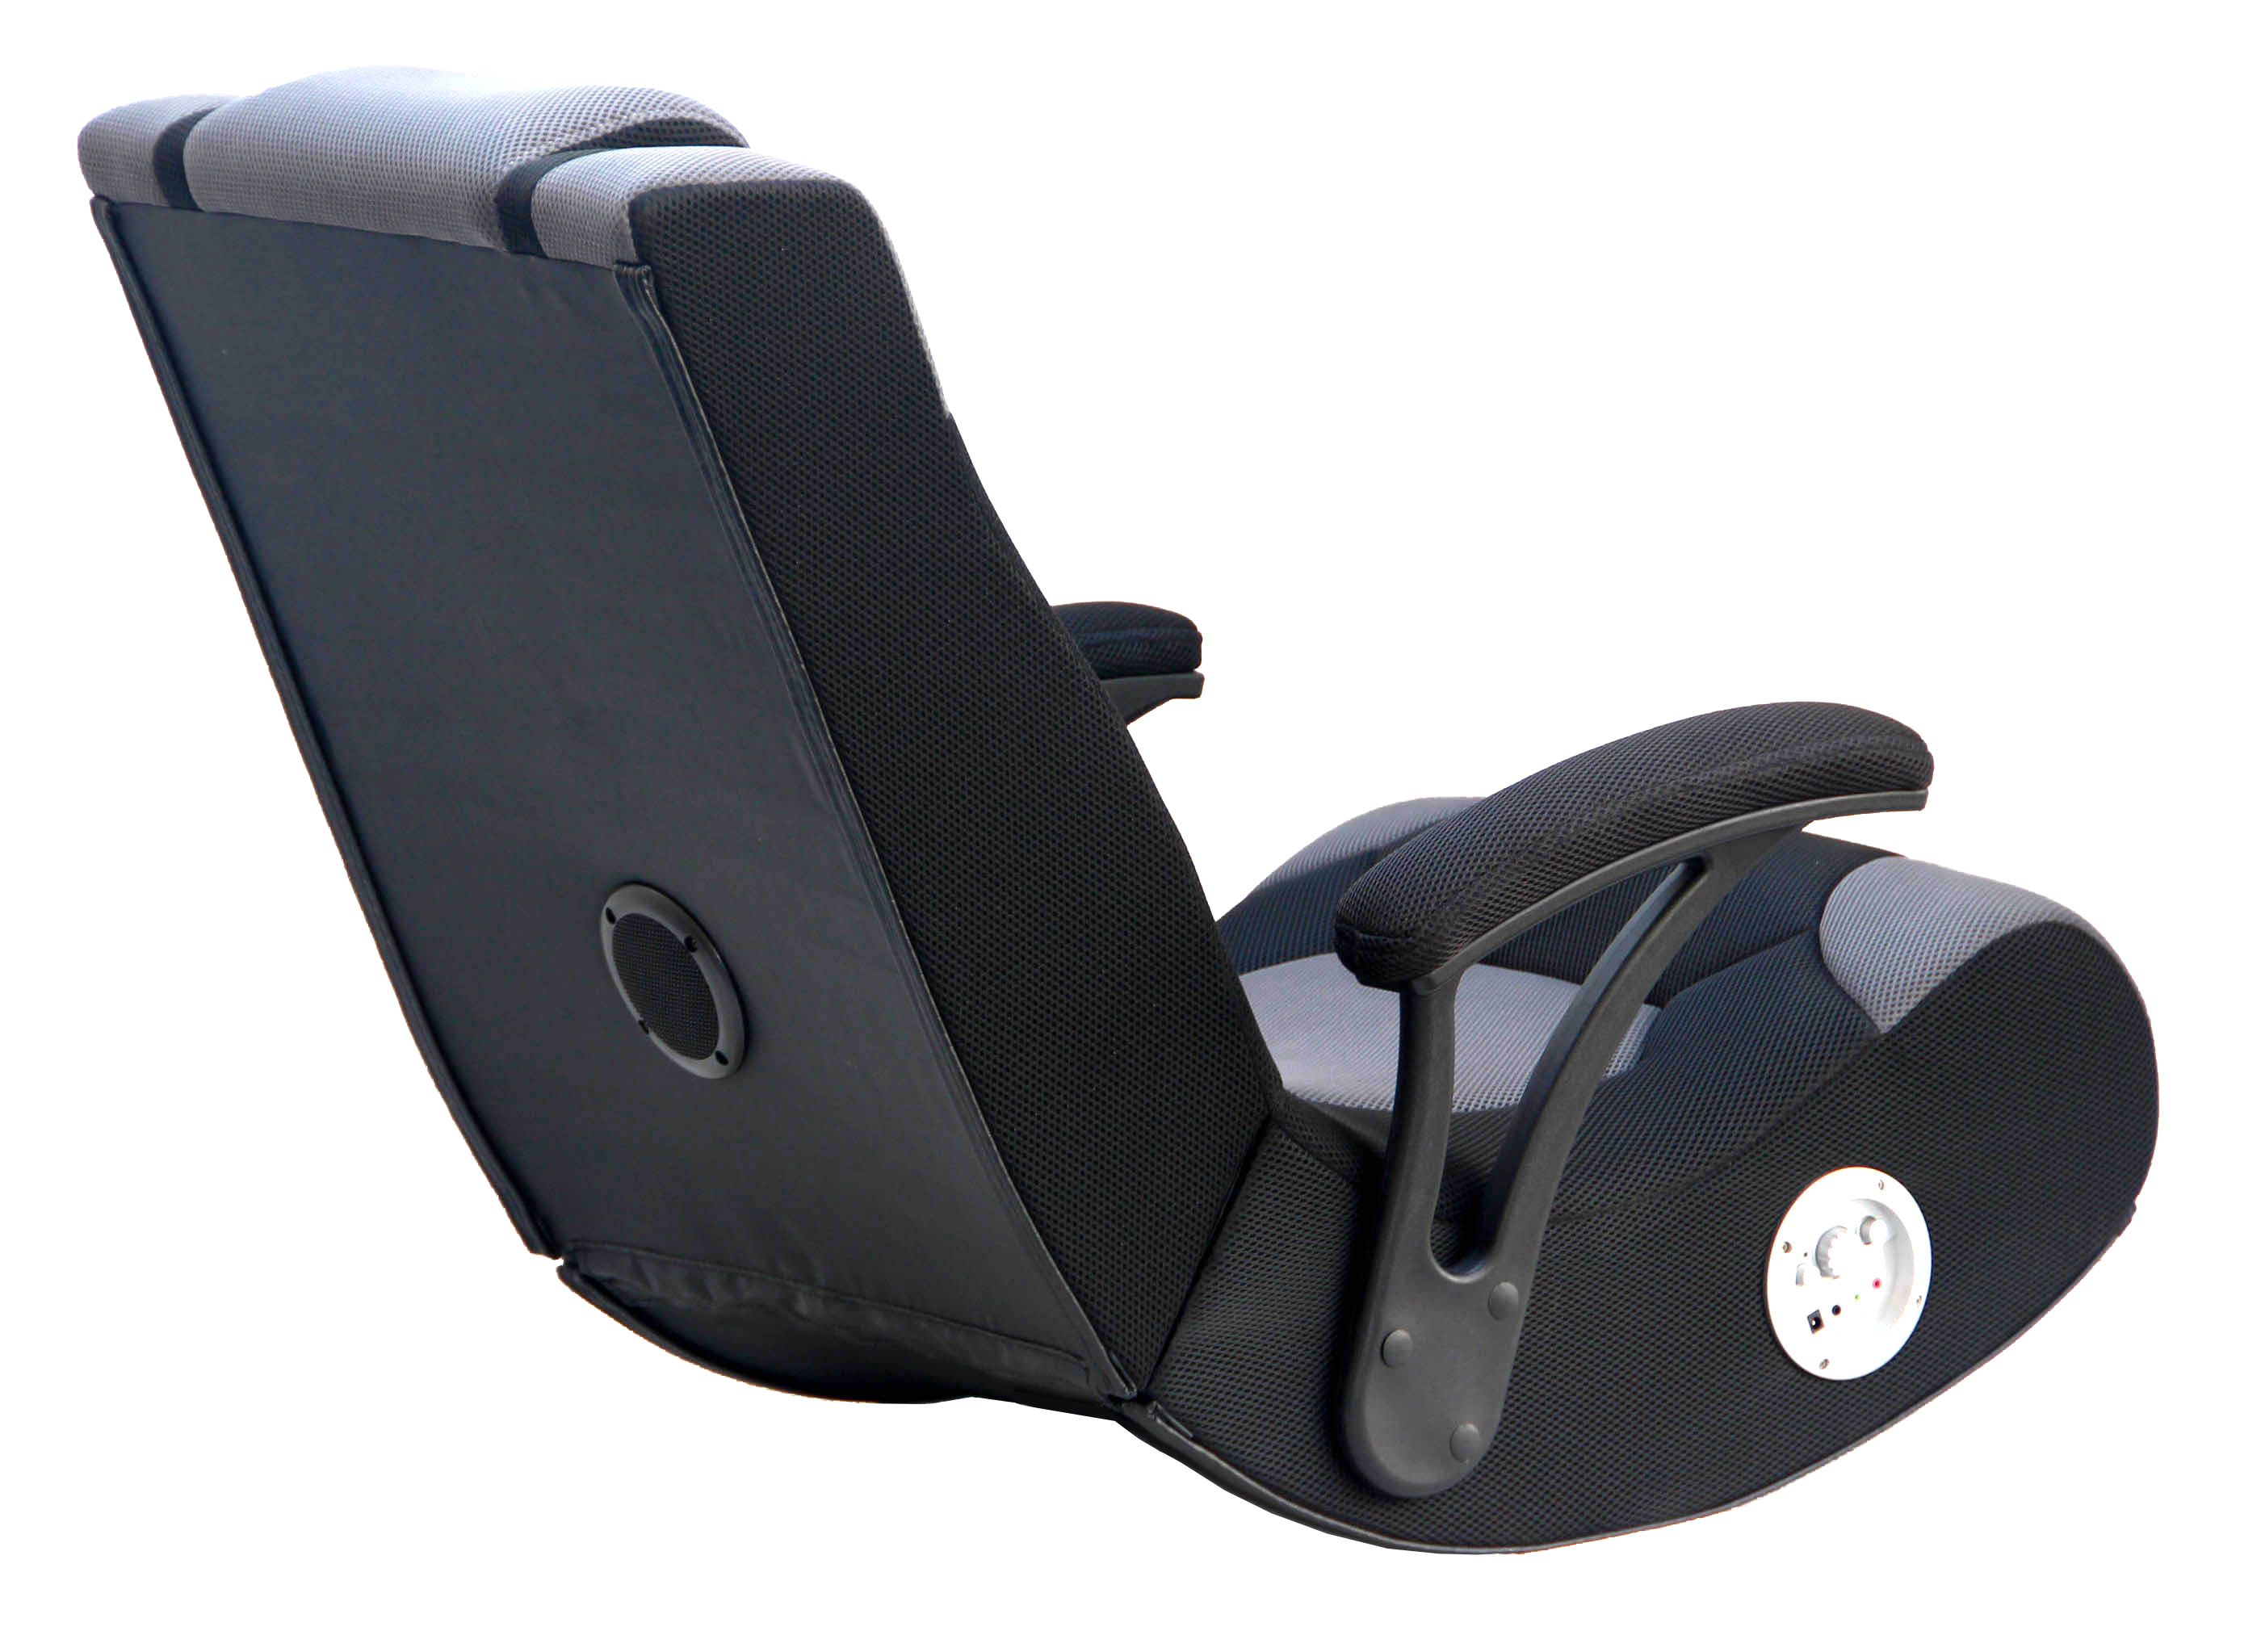 X Rocker Pro 200 Gaming Chair Rocker with Sound Enhancement Features - image 4 of 7